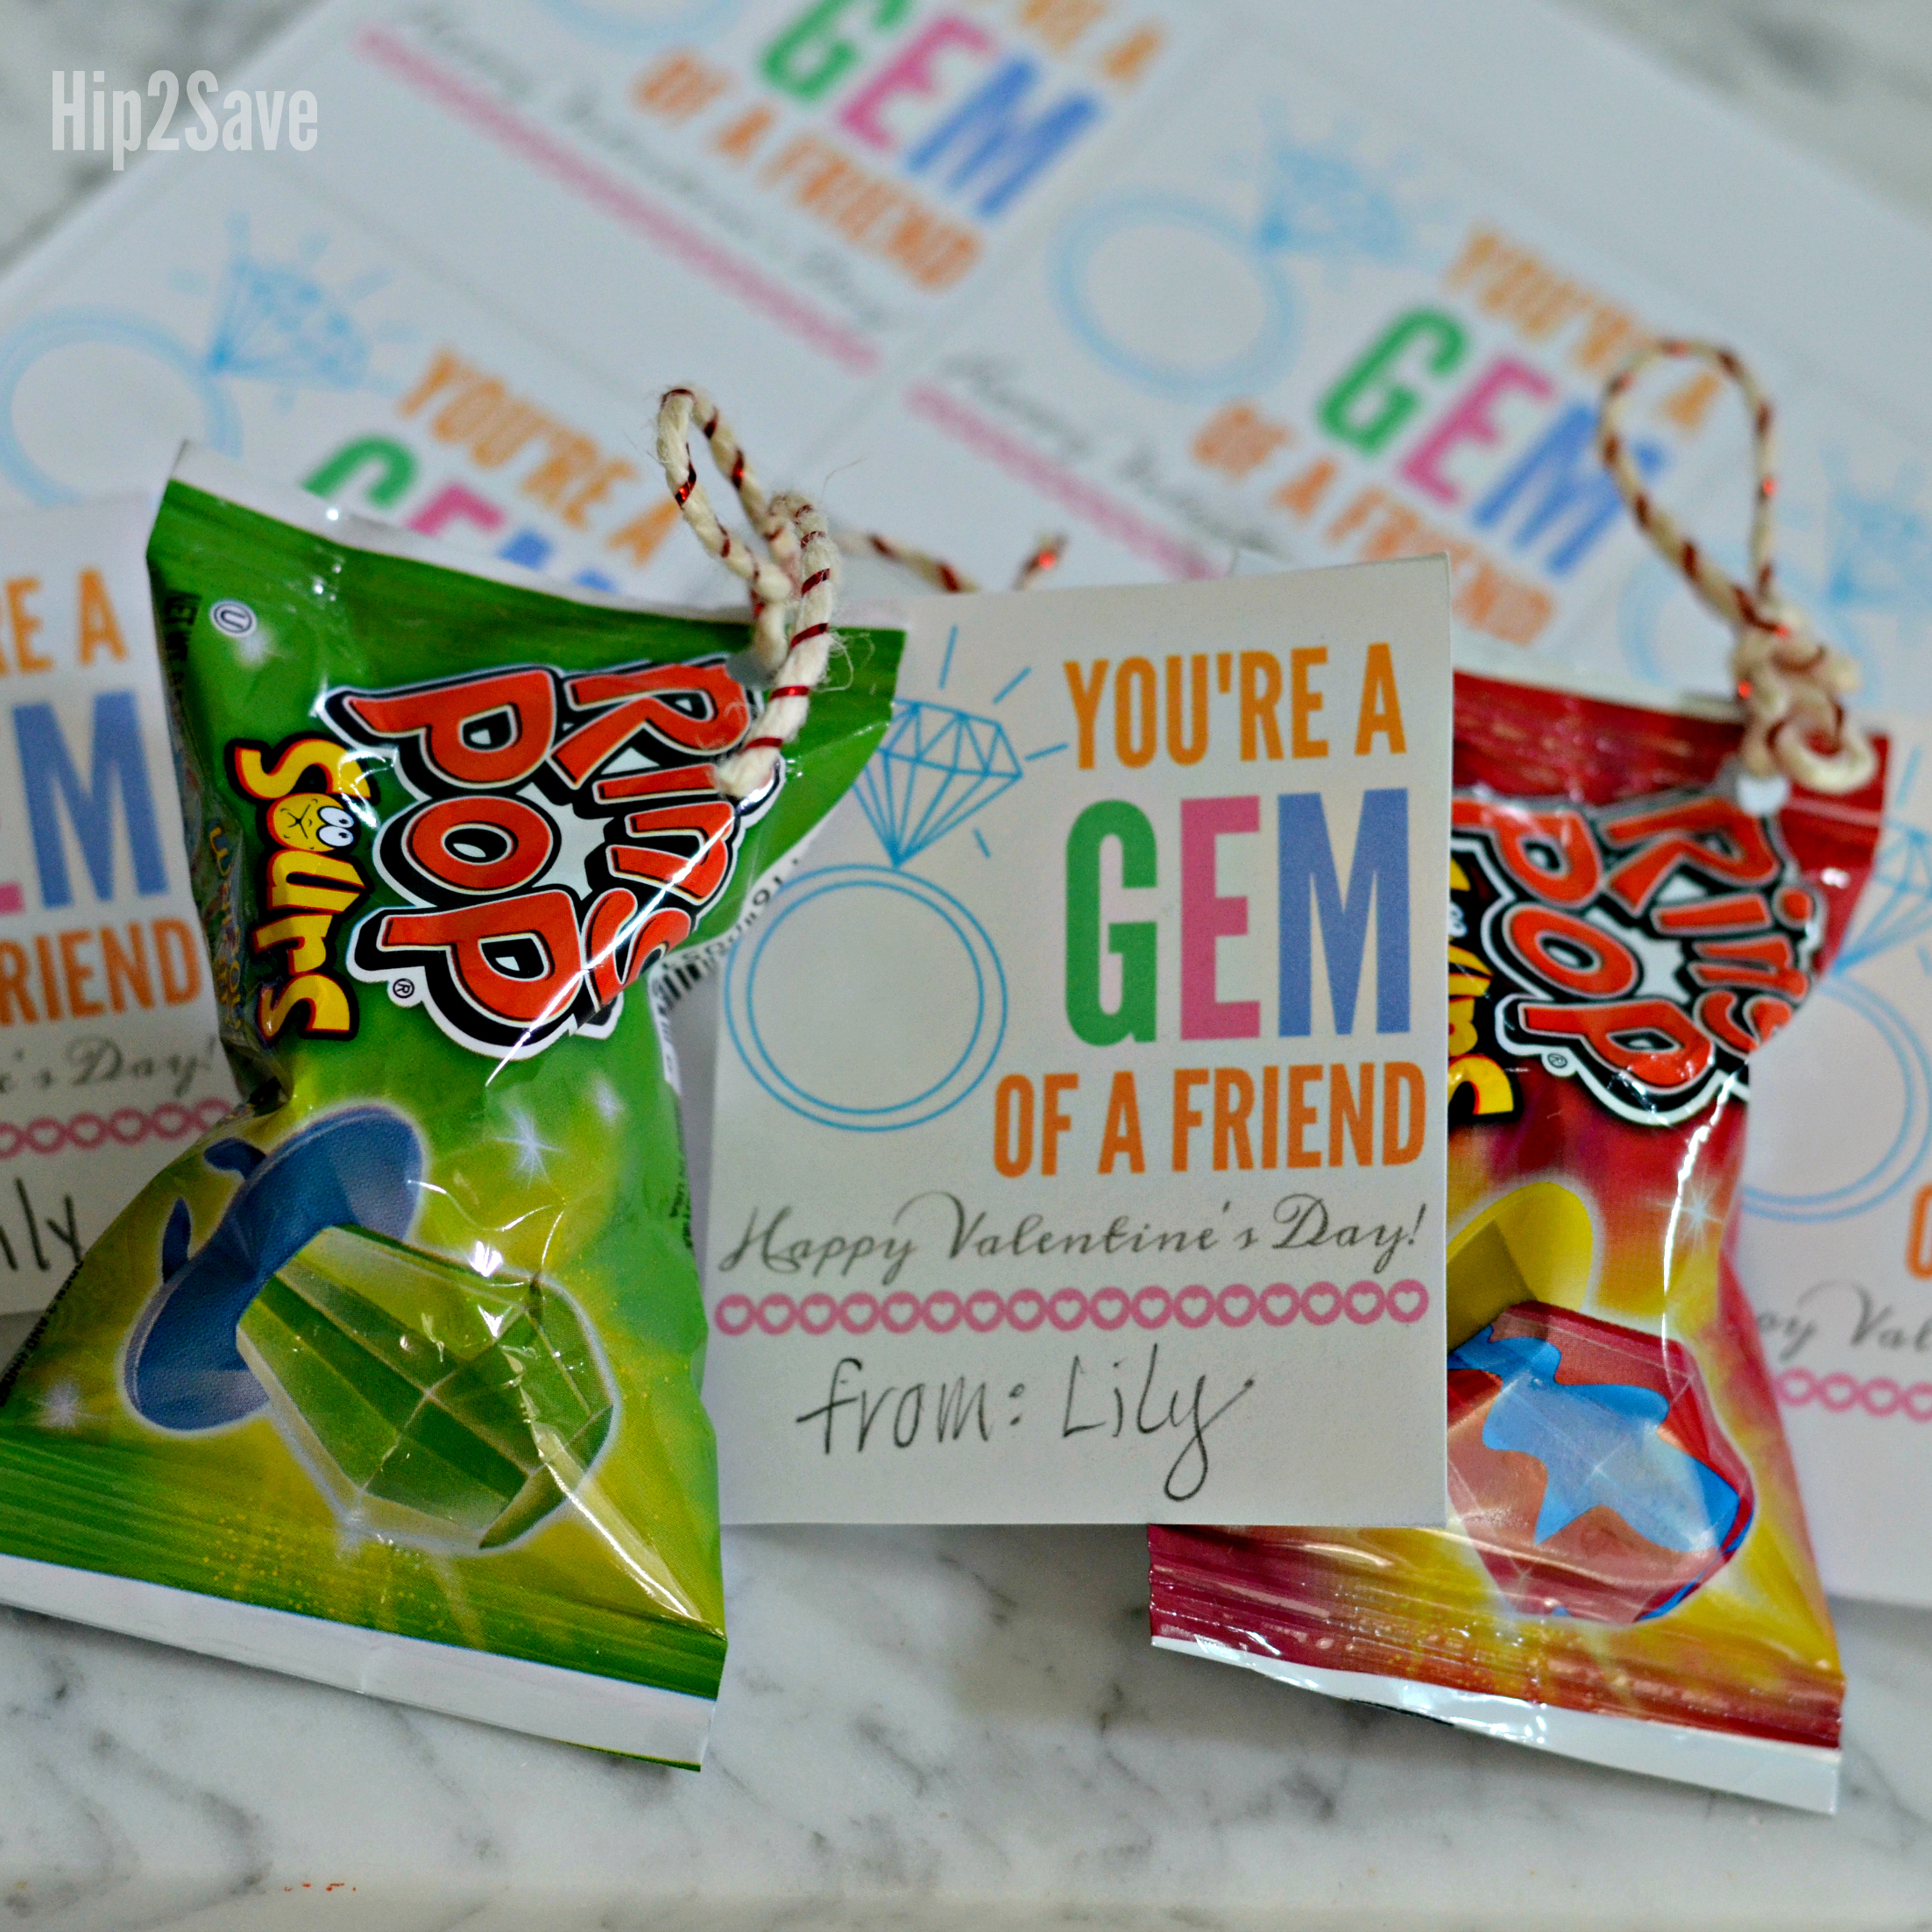 "You're a Gem of a Friend" Ring Pop Valentine's Day Idea